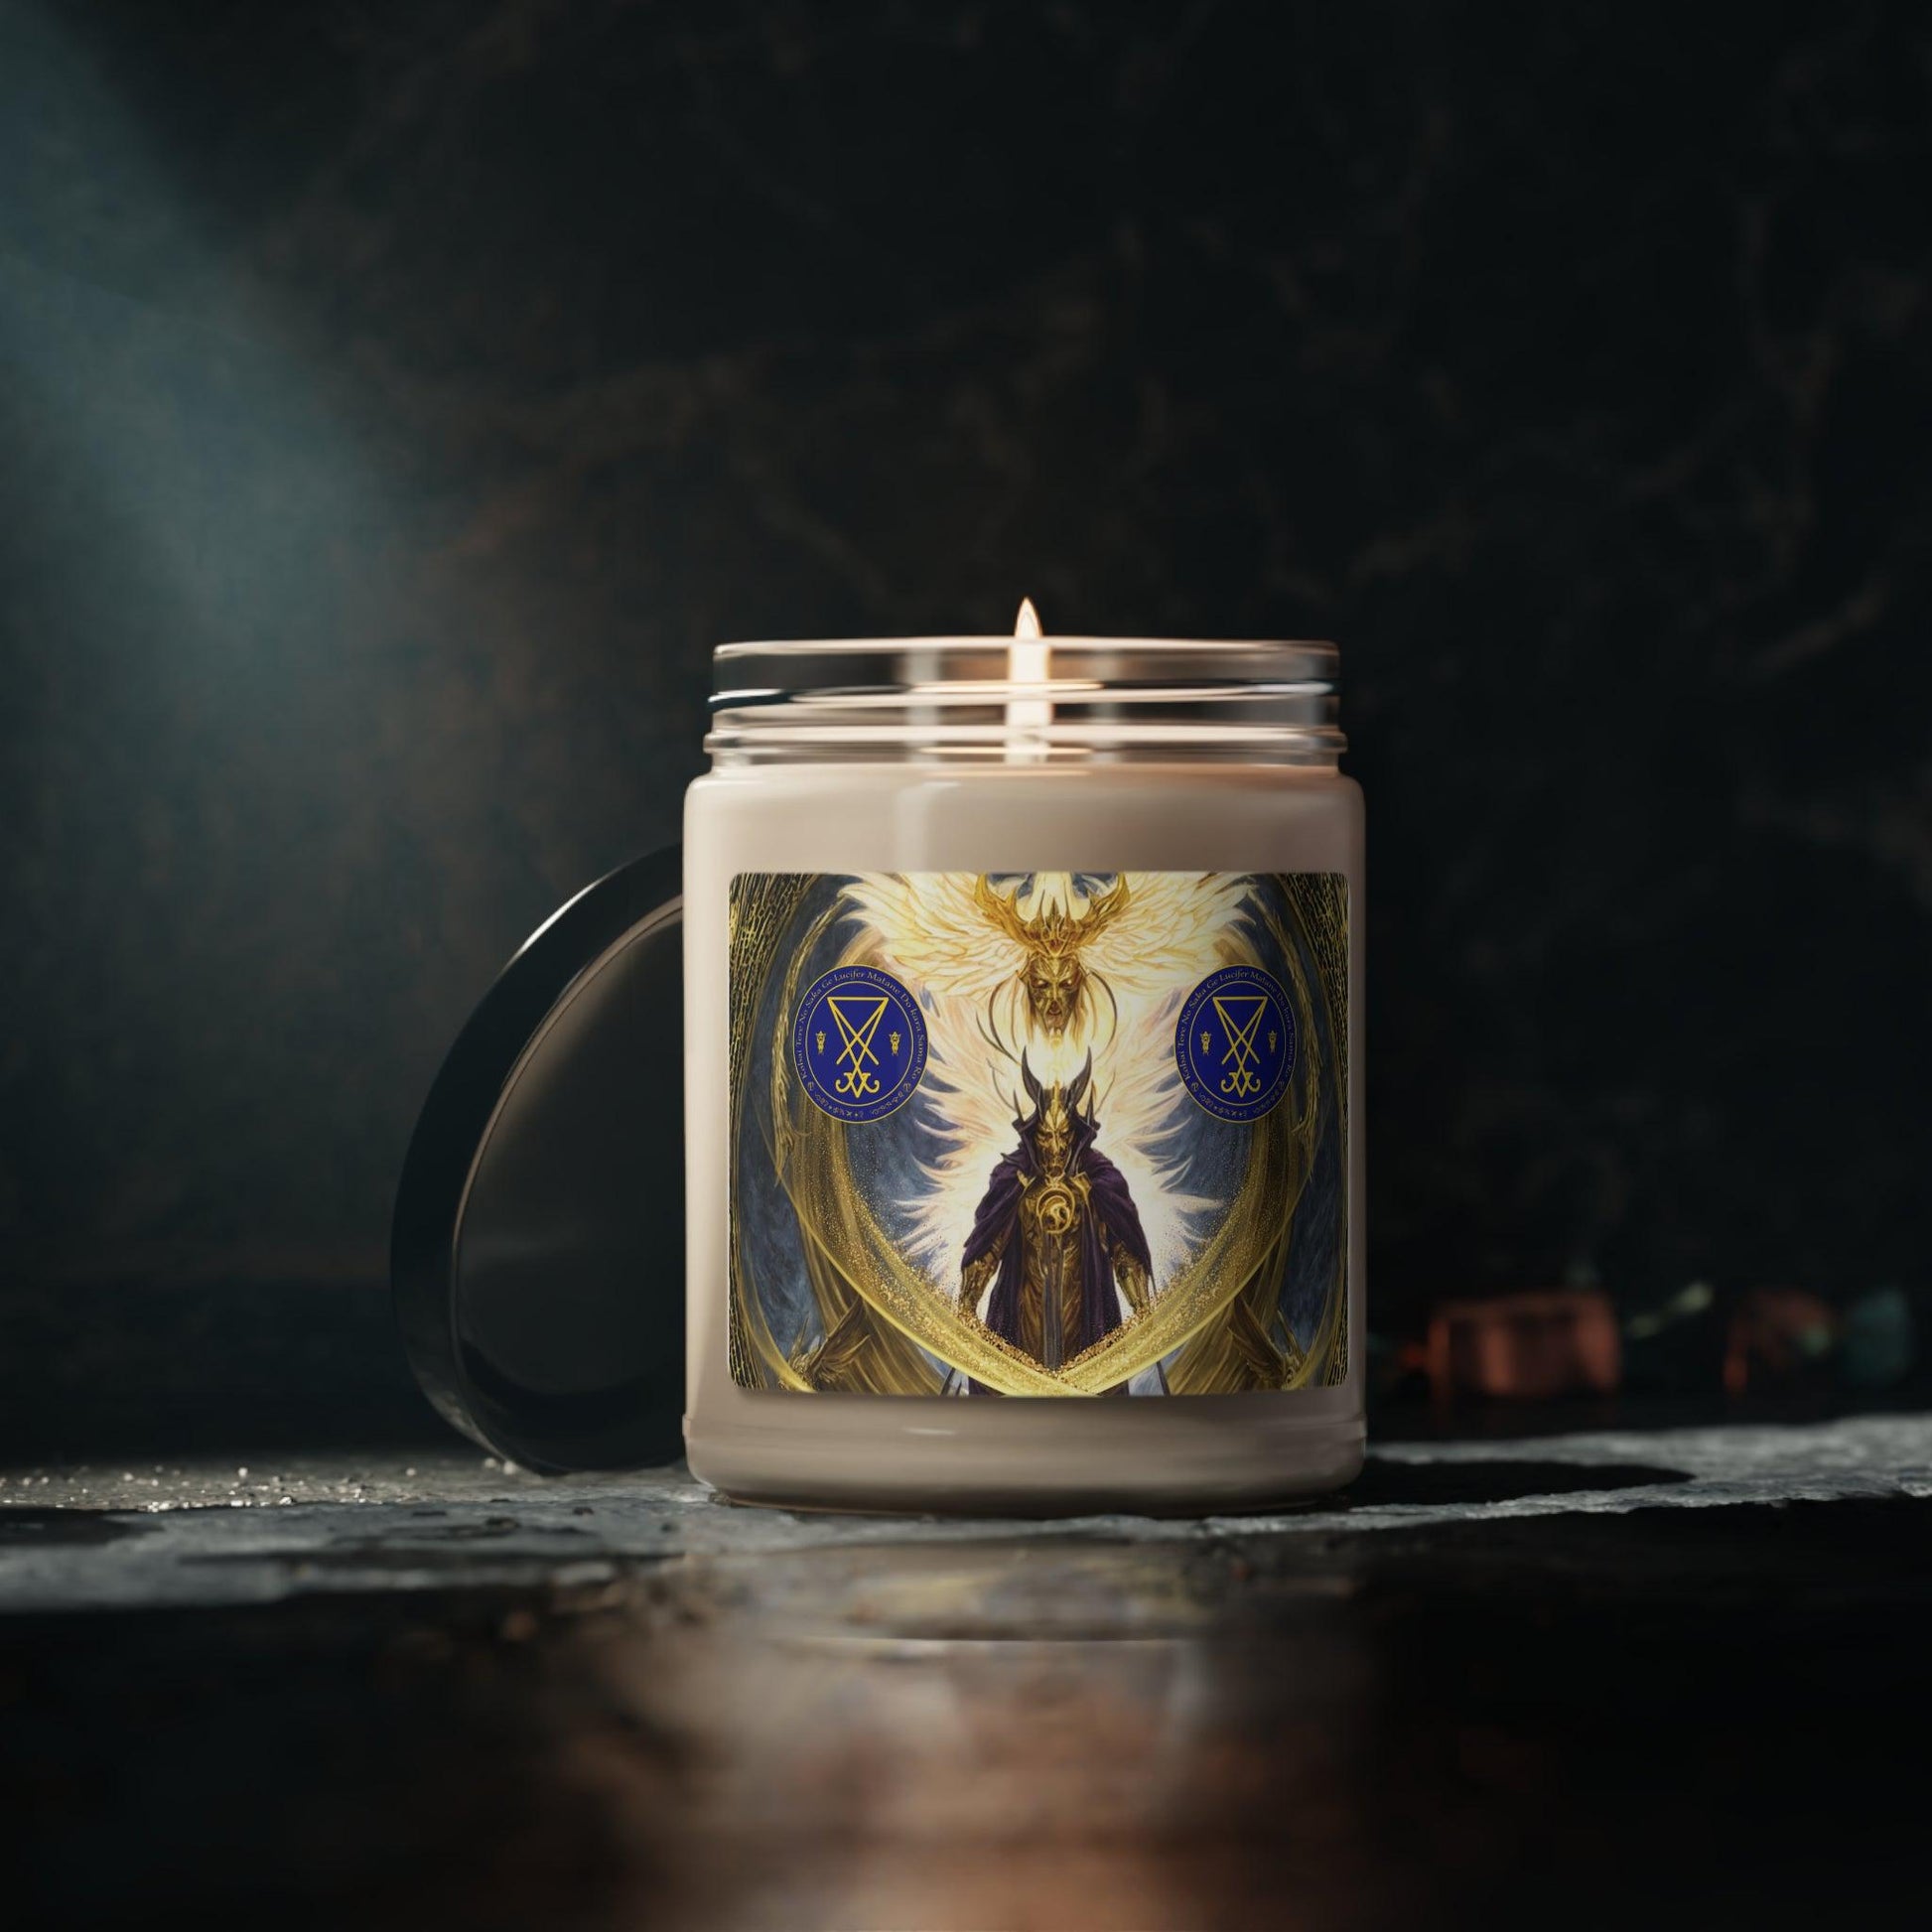 Demon-Lucifer-Scented-Soy-Candle-for-Altar-offerings-rituals-initiations-or-praying-and-meditation-15